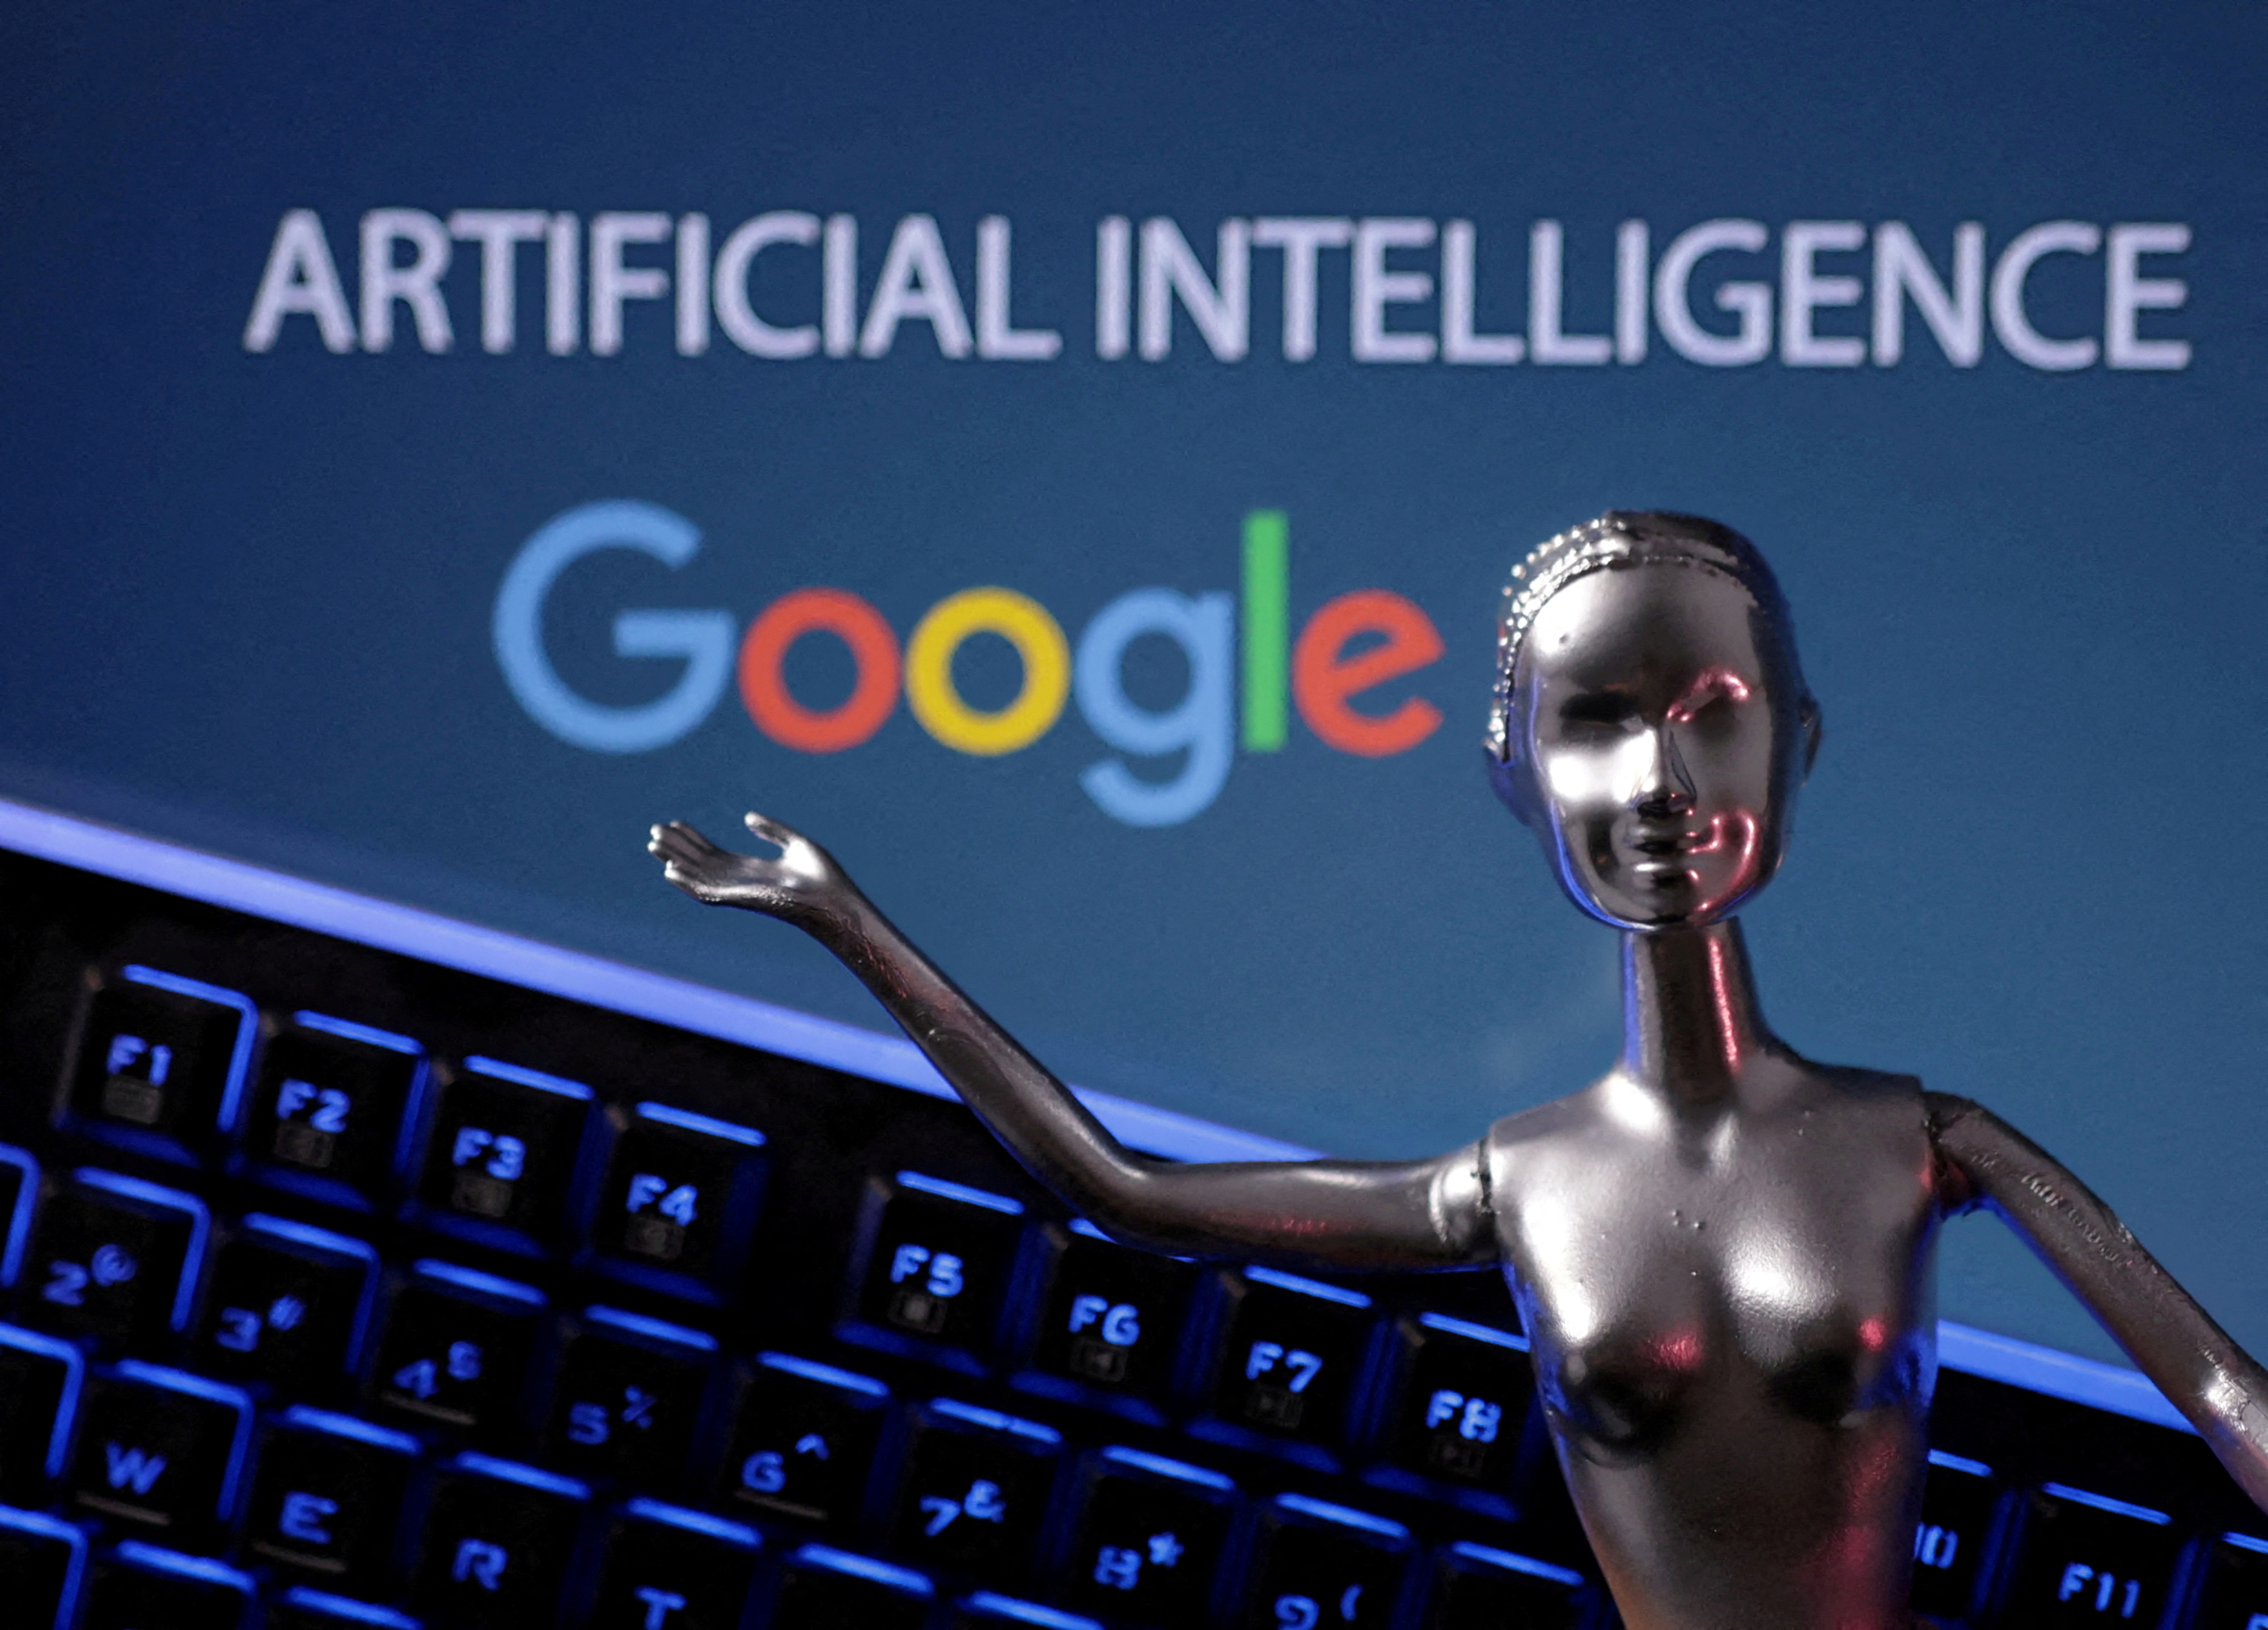 Illustration shows Google logo and AI Artificial Intelligence words